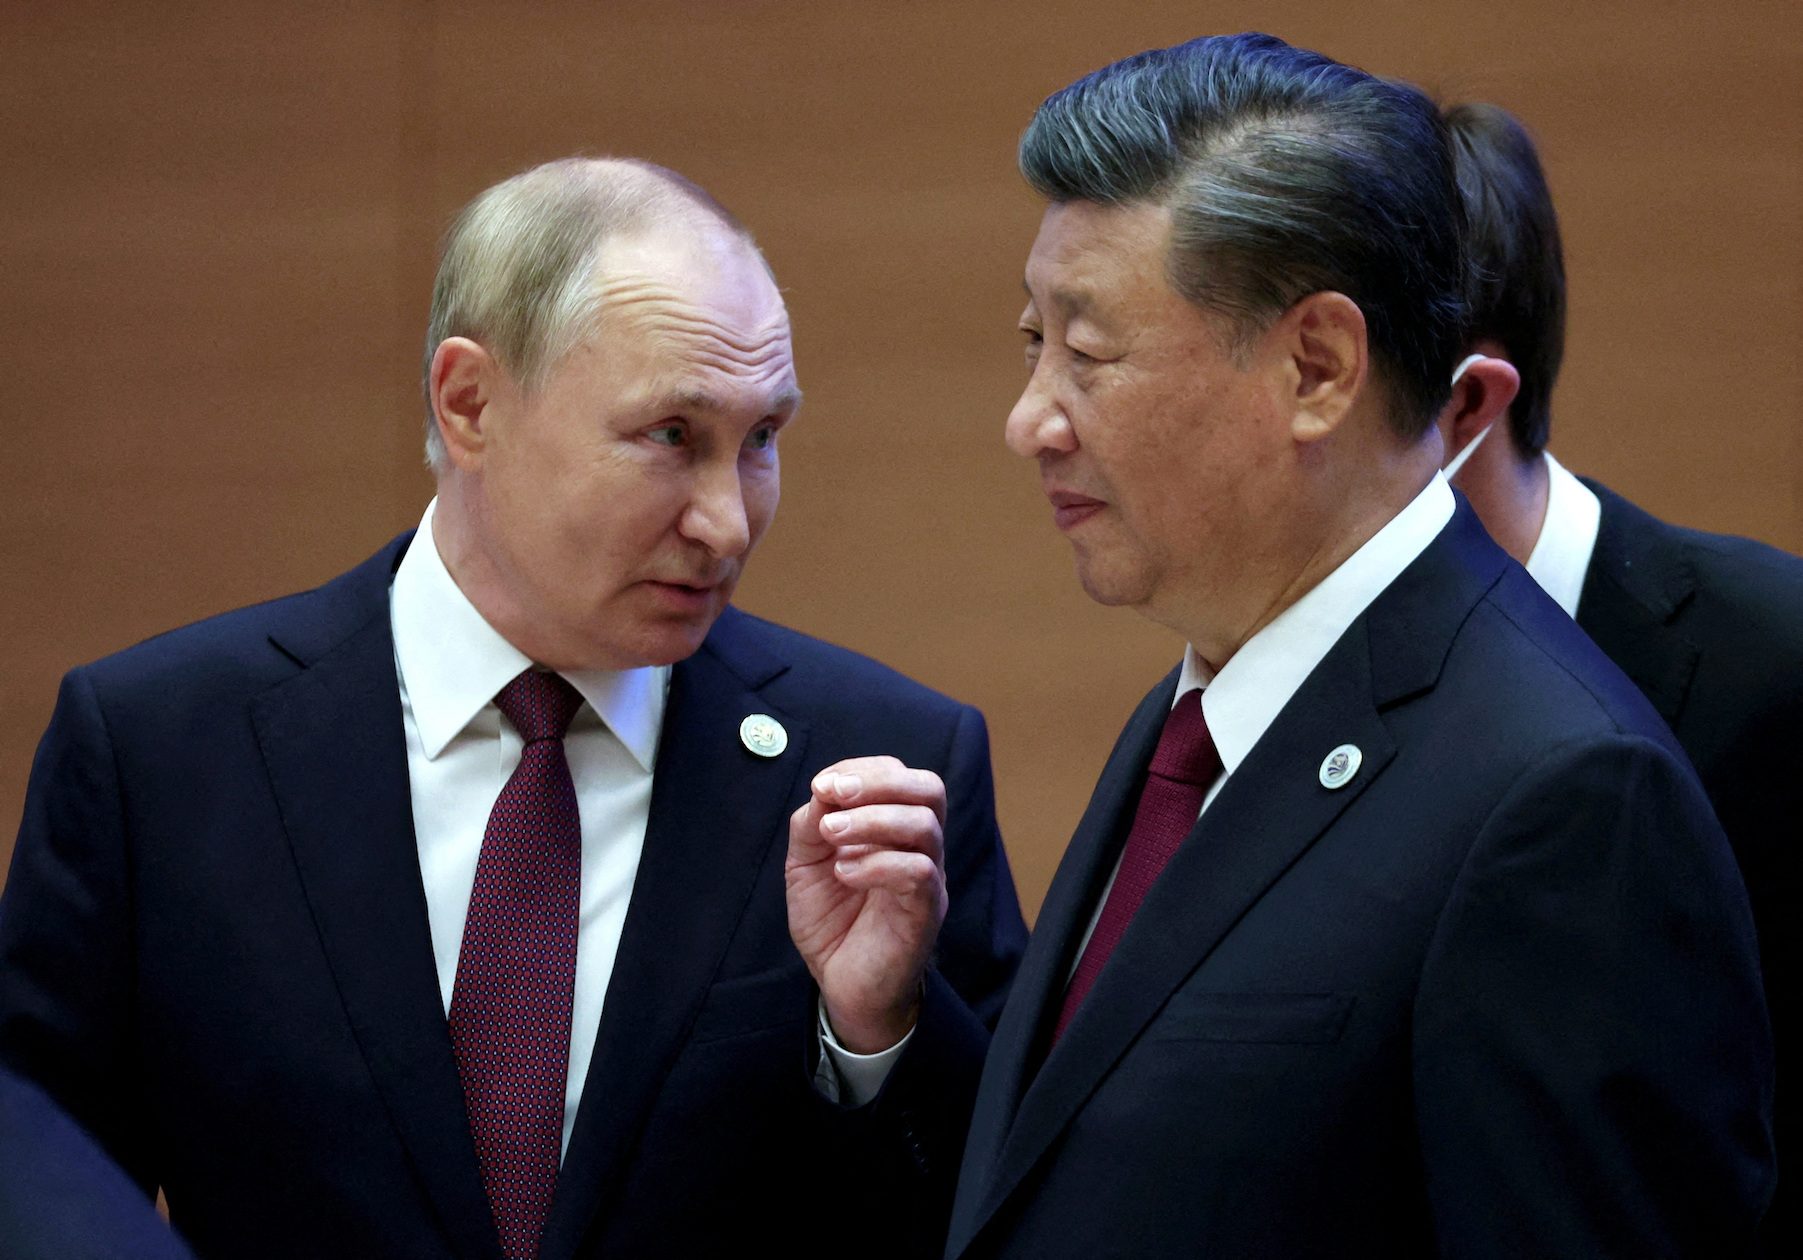 China’s role as Ukraine peacemaker in doubt as it ‘deepens’ Russia ties